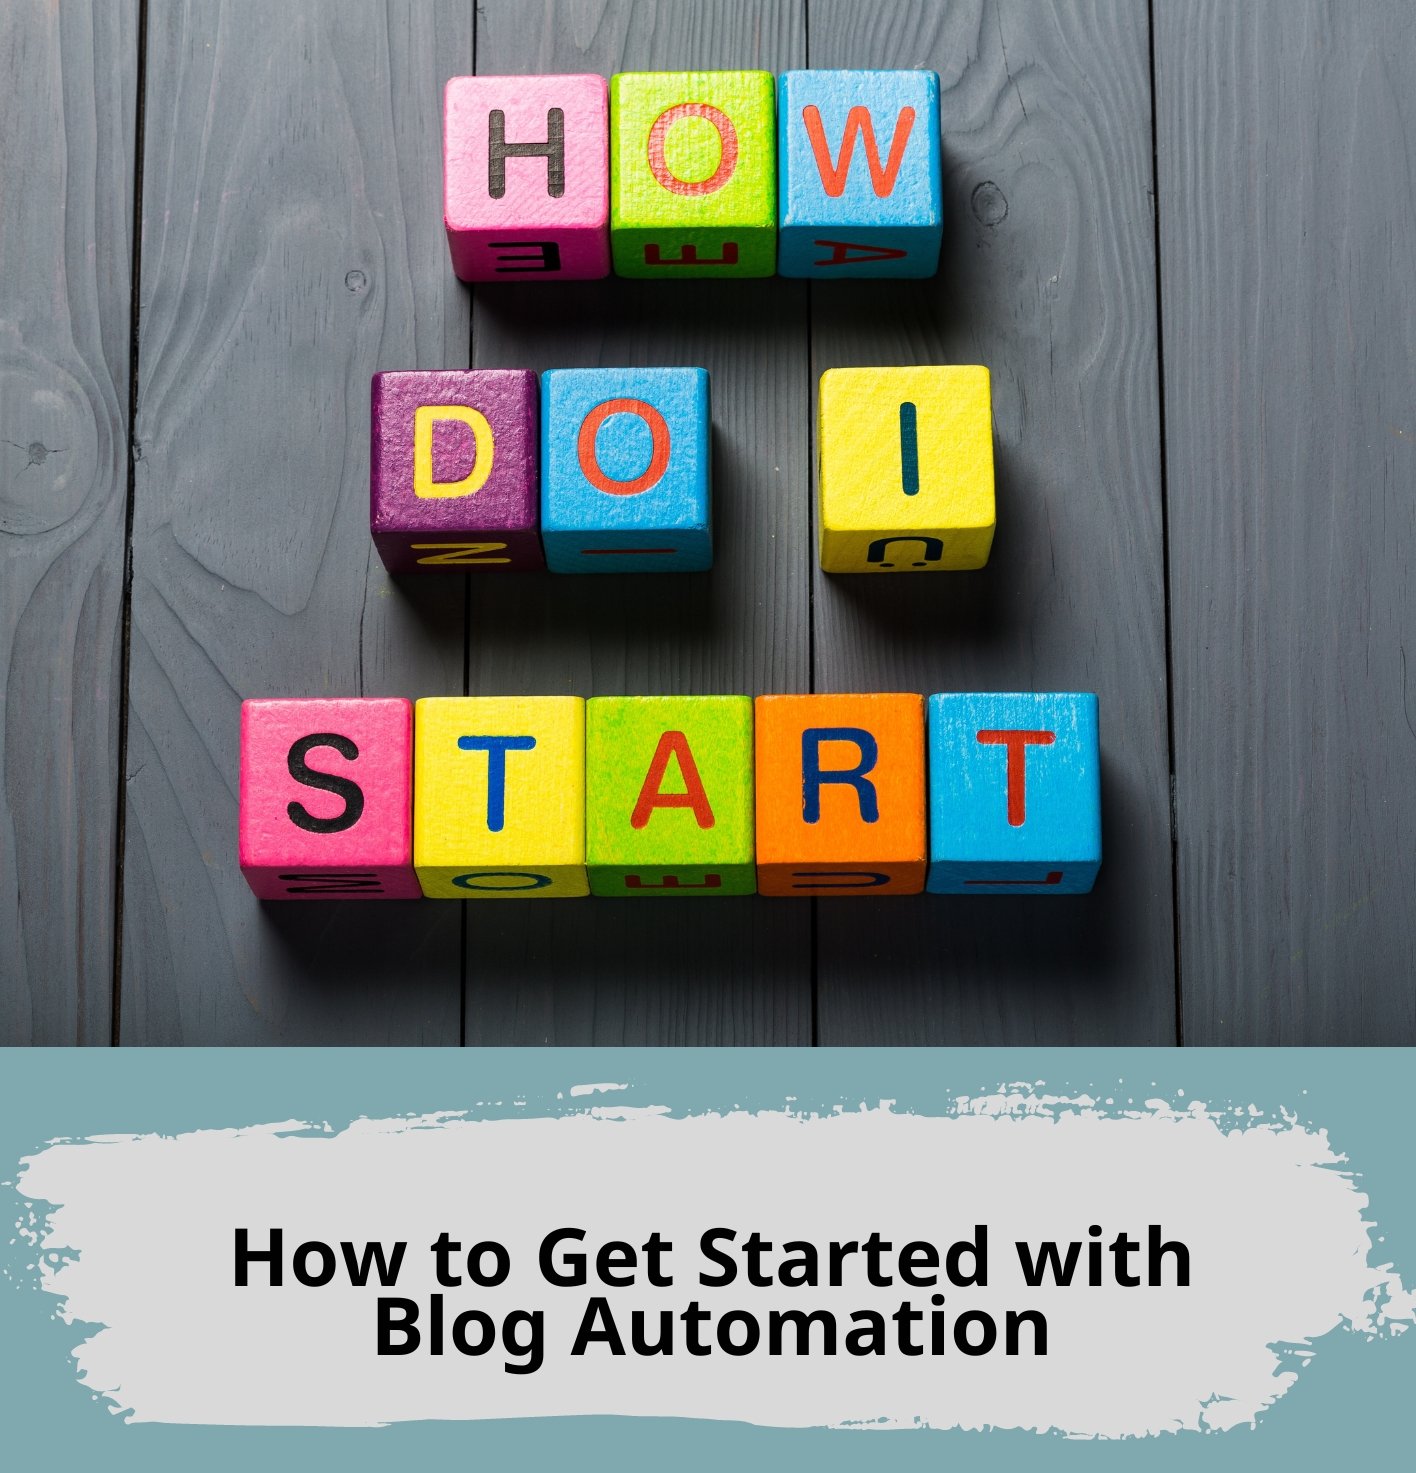 How to Get Started with Blog Automation